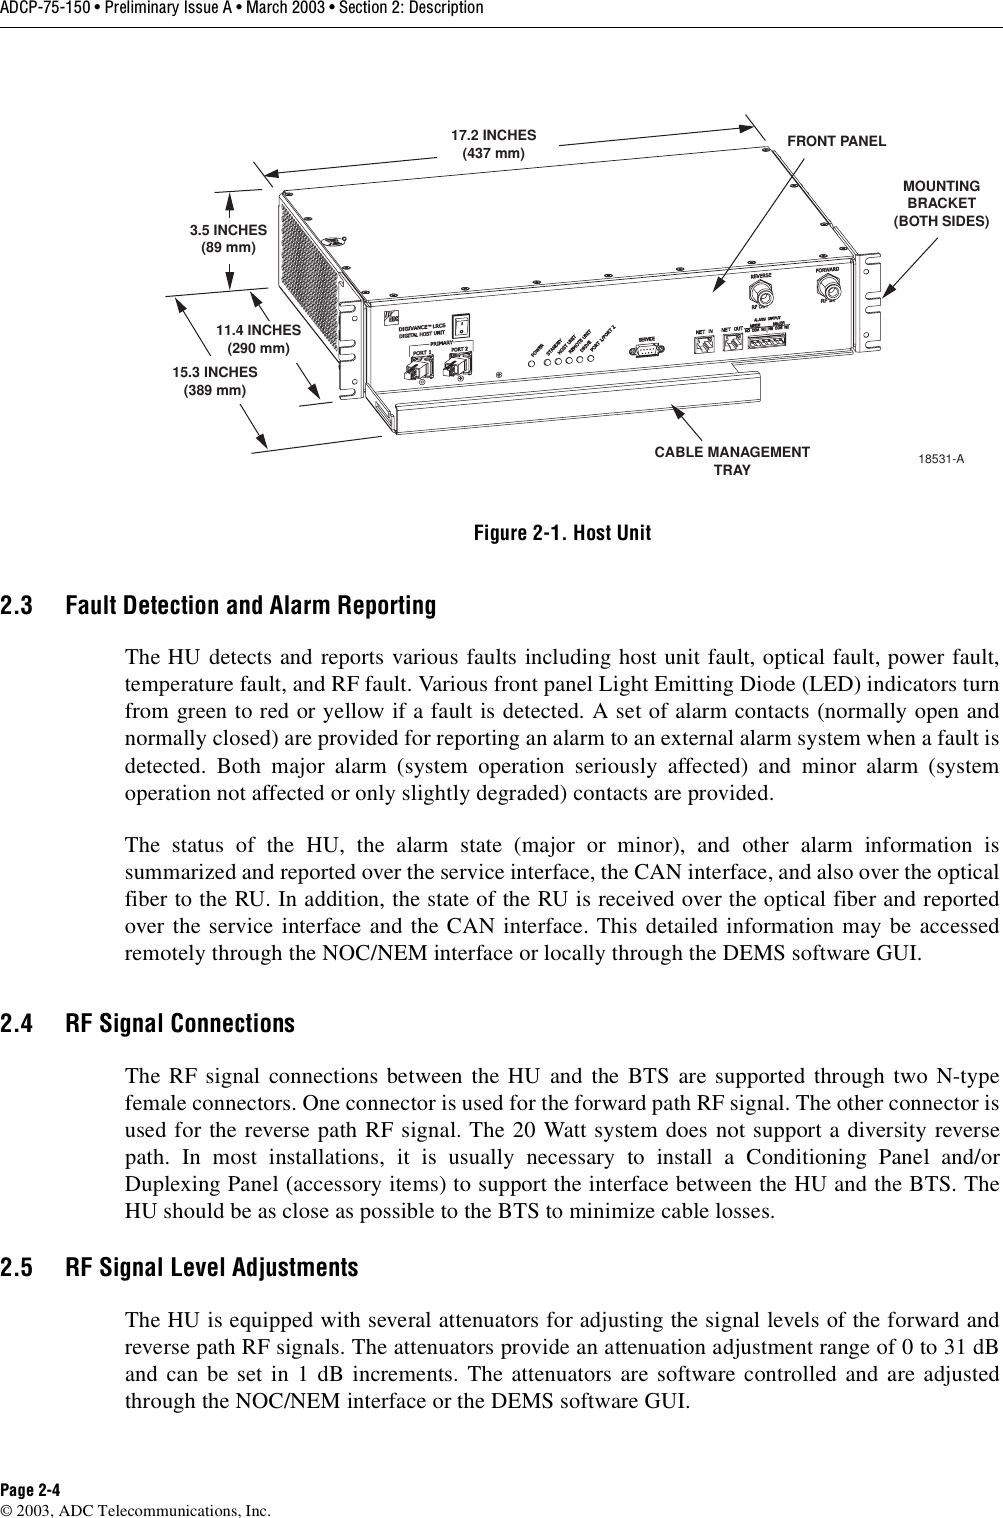 ADCP-75-150 • Preliminary Issue A • March 2003 • Section 2: DescriptionPage 2-4©2003, ADC Telecommunications, Inc.Figure 2-1. Host Unit2.3 Fault Detection and Alarm ReportingThe HU detects and reports various faults including host unit fault, optical fault, power fault,temperature fault, and RF fault. Various front panel Light Emitting Diode (LED) indicators turnfrom green to red or yellow if afault is detected. Aset of alarm contacts (normally open andnormally closed) are provided for reporting an alarm to an external alarm system when afault isdetected. Both major alarm (system operation seriously affected) and minor alarm (systemoperation not affected or only slightly degraded) contacts are provided.The status of the HU, the alarm state (major or minor), and other alarm information issummarized and reported over the service interface, the CAN interface, and also over the opticalfiber to the RU. In addition, the state of the RU is received over the optical fiber and reportedover the service interface and the CAN interface. This detailed information may be accessedremotely through the NOC/NEM interface or locally through the DEMS software GUI.2.4 RF Signal ConnectionsThe RF signal connections between the HU and the BTS are supported through two N-typefemale connectors. One connector is used for the forward path RF signal. The other connector isused for the reverse path RF signal. The 20 Watt system does not support adiversity reversepath. In most installations, it is usually necessary to install aConditioning Panel and/orDuplexing Panel (accessory items) to support the interface between the HU and the BTS. TheHU should be as close as possible to the BTS to minimize cable losses.2.5 RF Signal Level AdjustmentsThe HU is equipped with several attenuators for adjusting the signal levels of the forward andreverse path RF signals. The attenuators provide an attenuation adjustment range of 0to 31 dBand can be set in 1dB increments. The attenuators are software controlled and are adjustedthrough the NOC/NEM interface or the DEMS software GUI.17.2 INCHES(437 mm)3.5 INCHES(89 mm)11.4 INCHES(290 mm)15.3 INCHES(389 mm)FRONT PANELCABLE MANAGEMENTTRAYMOUNTINGBRACKET(BOTH SIDES)18531-A